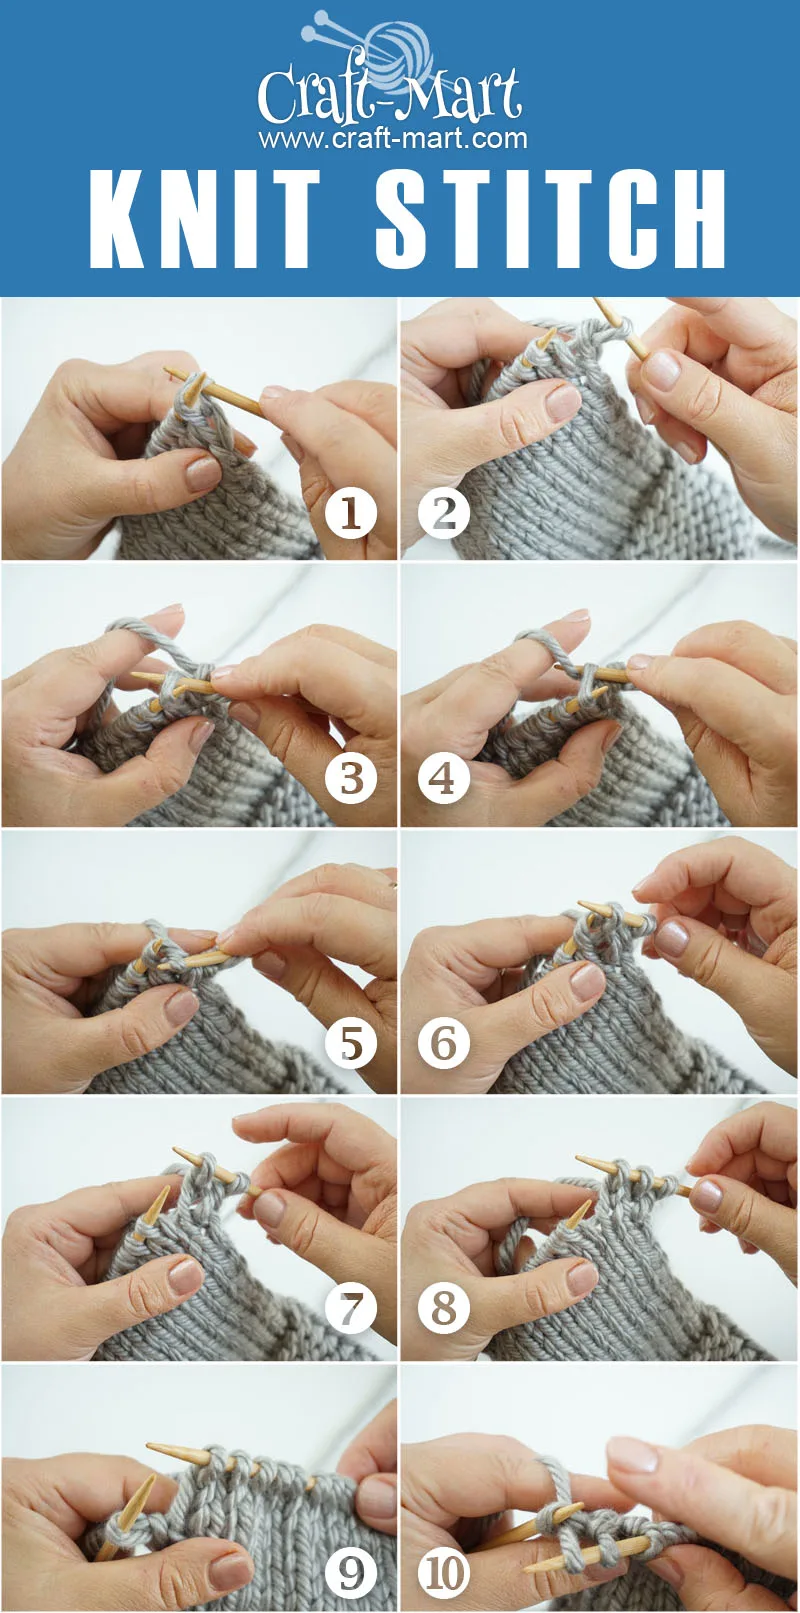 knit stitch step-by-step photo tutorial of basic knitting stitch for beginners